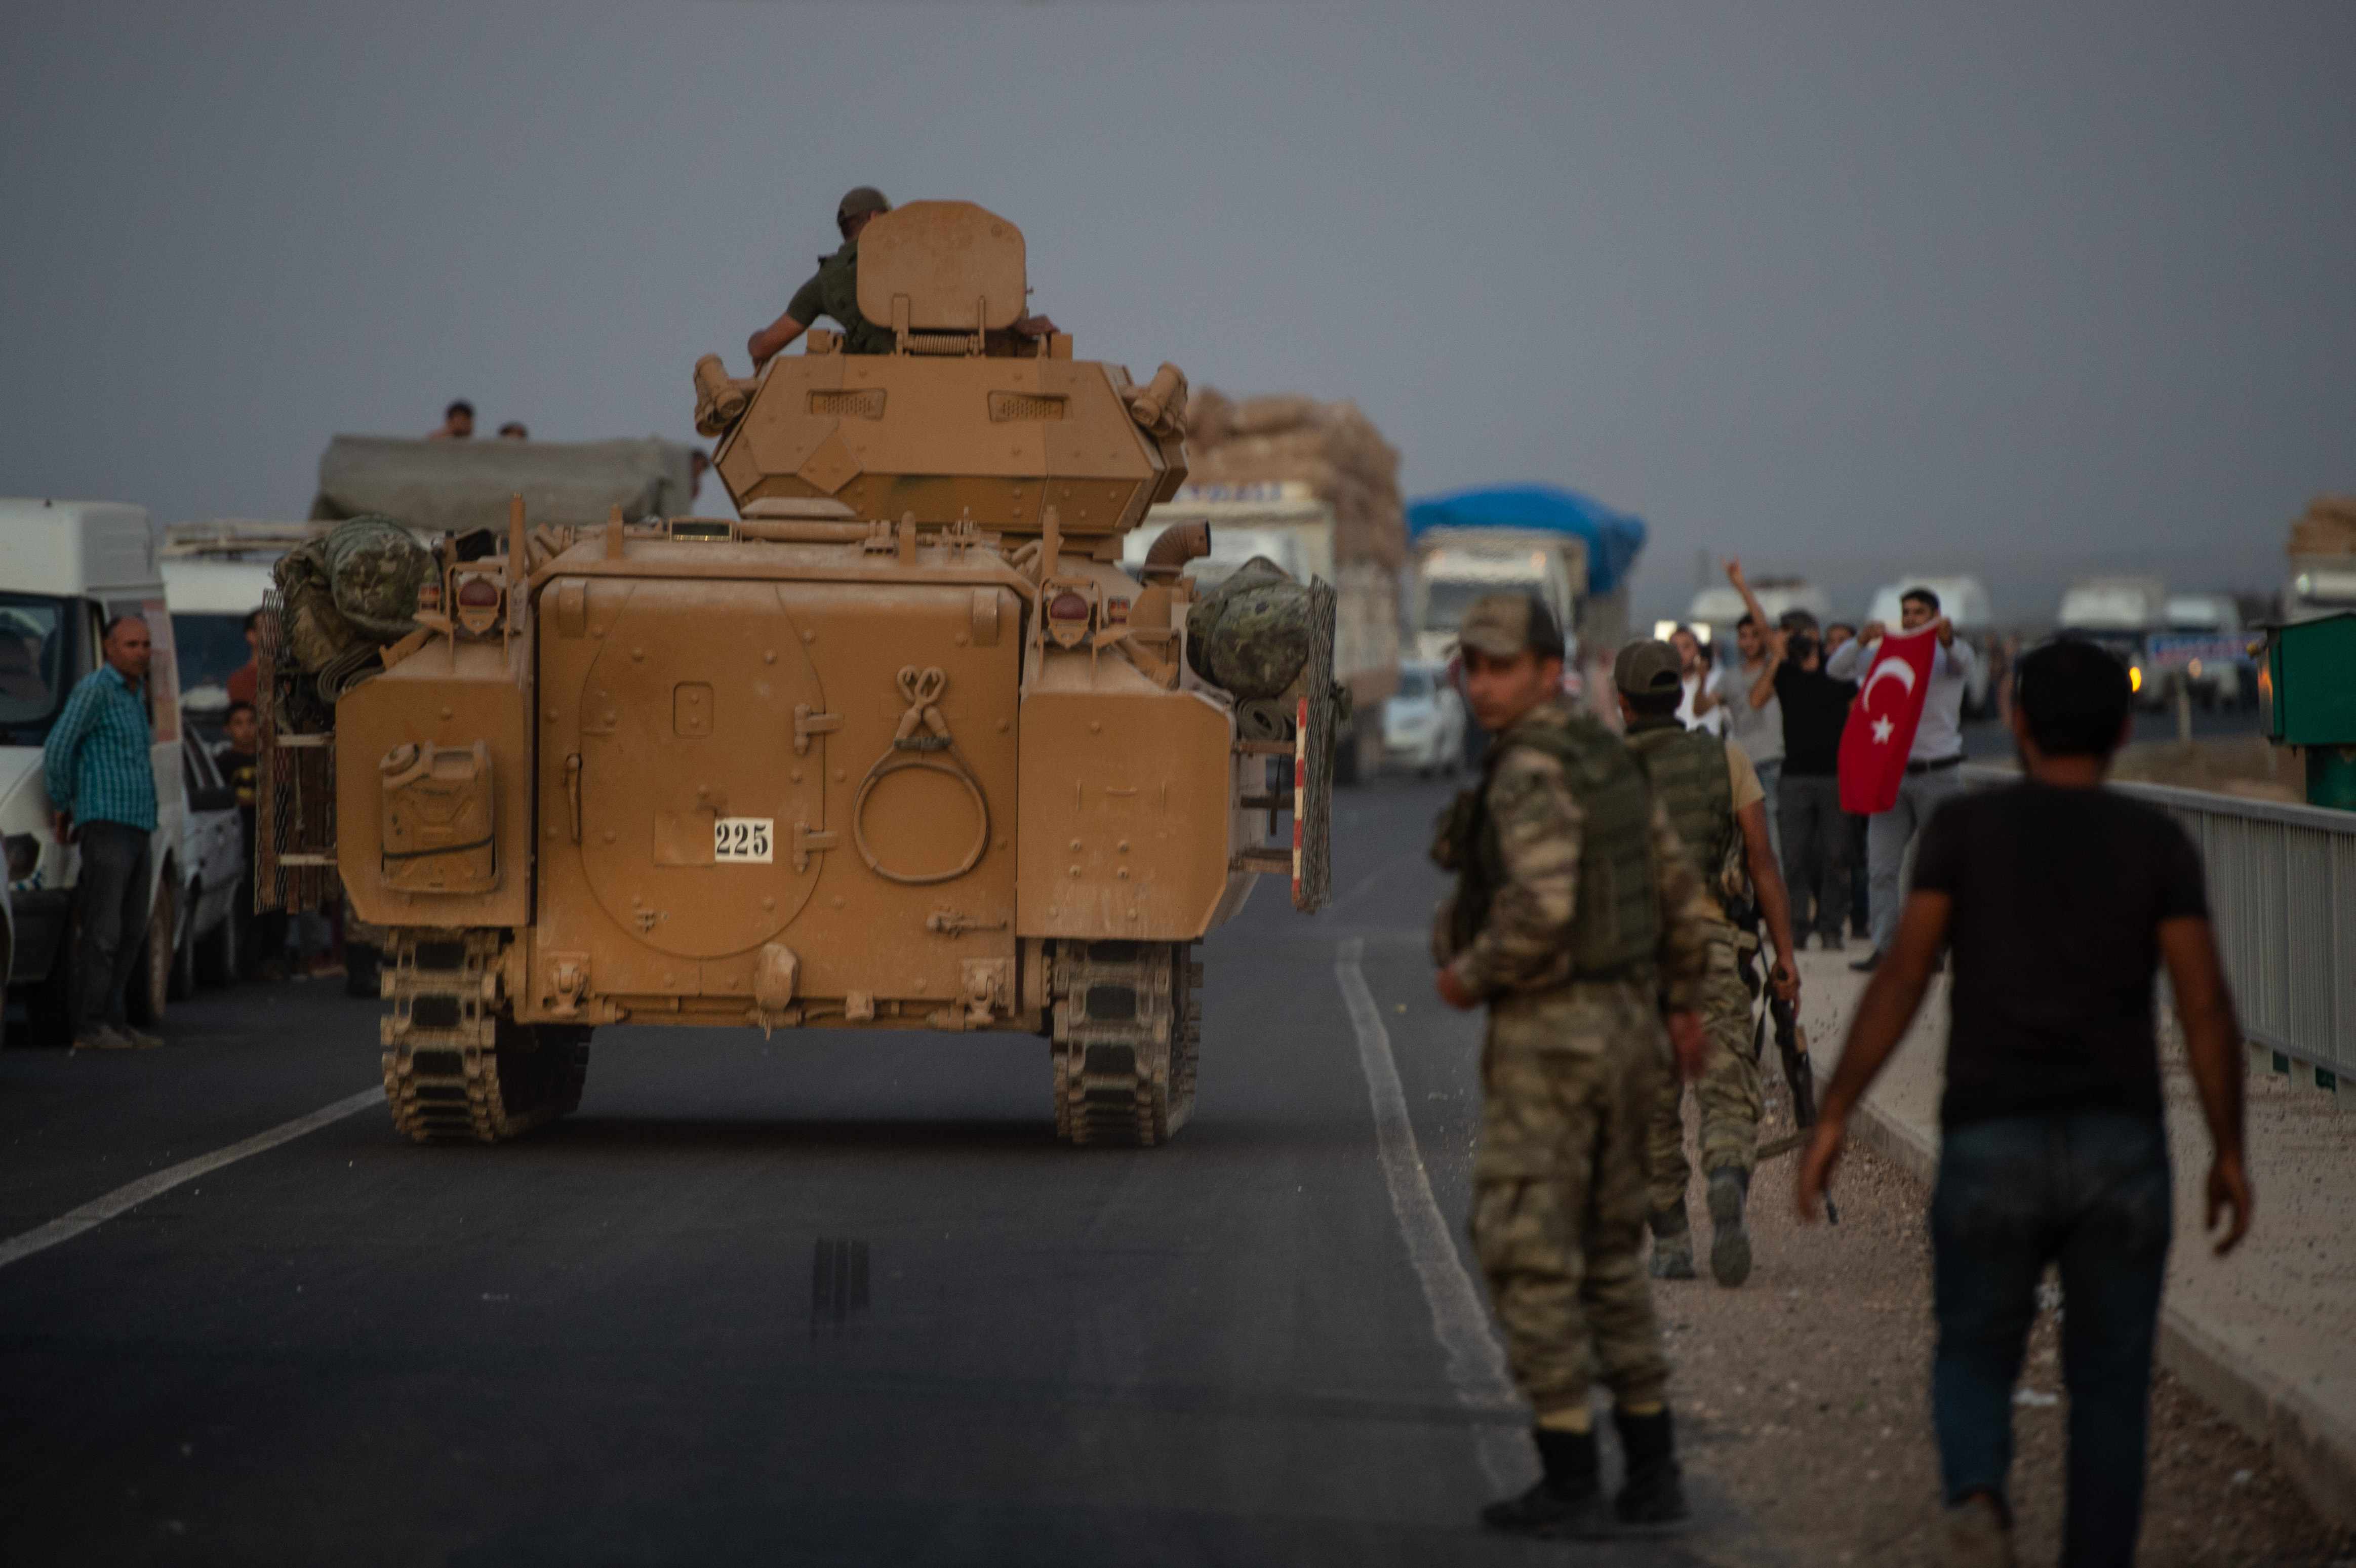 AKCAKALE, TURKEY - OCTOBER 09: People wave as Turkish soldiers prepare to cross the border into Syria on October 09, 2019 in Akcakale, Turkey. The military action is part of a campaign to ext